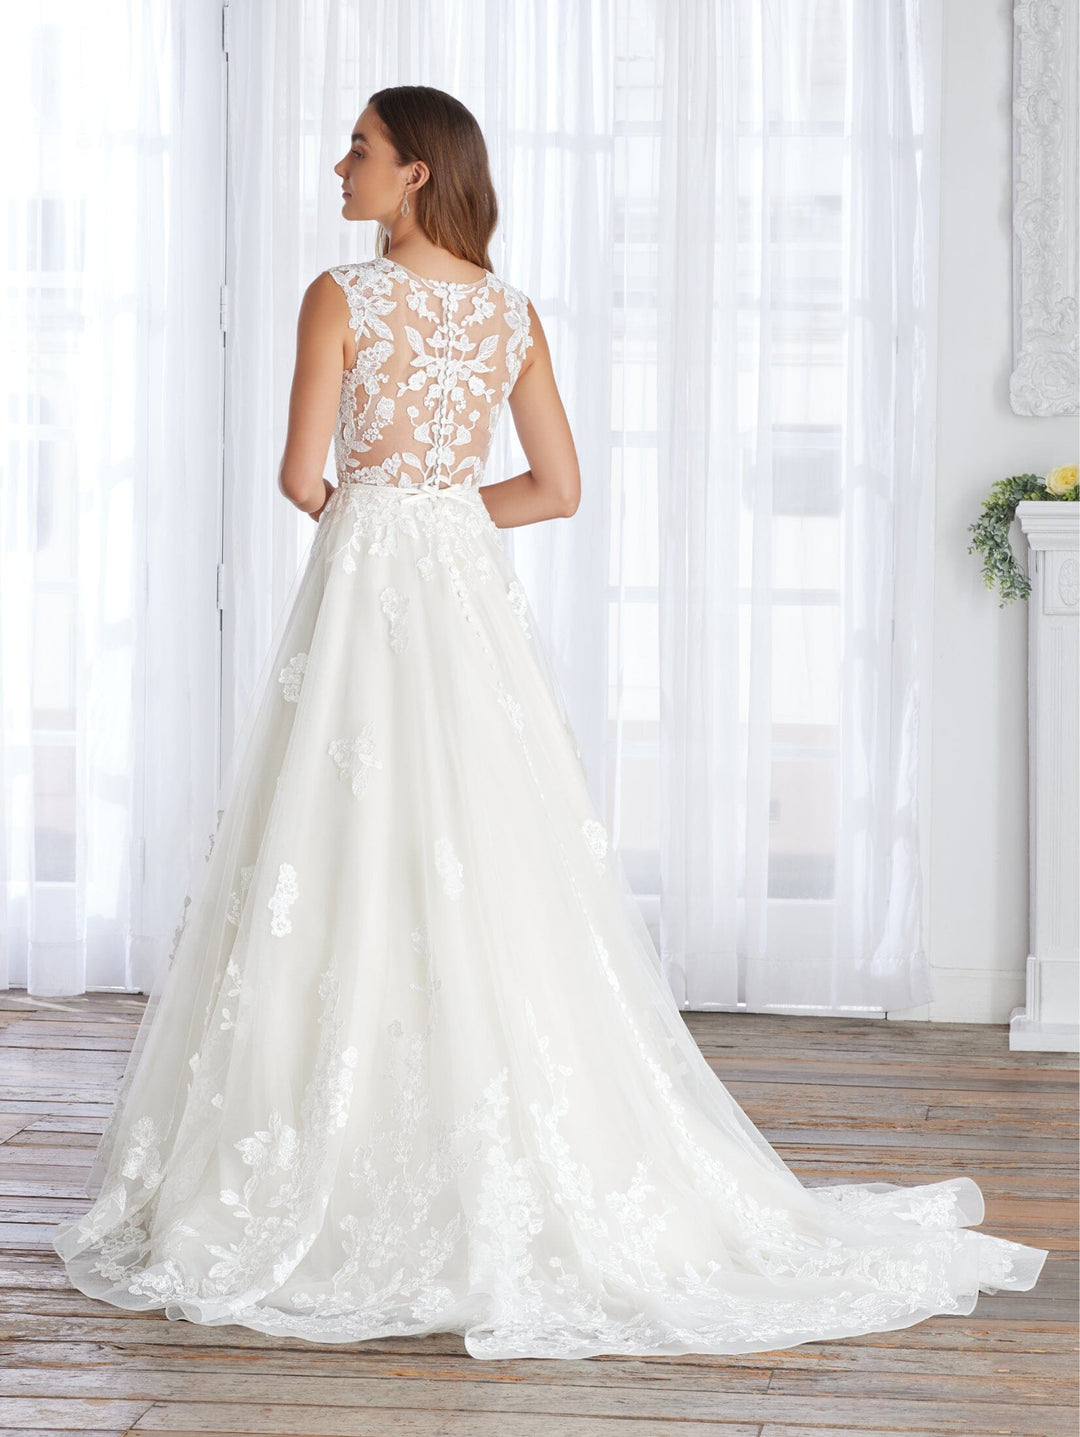 Applique A-line Tulle Bridal Gown by Adrianna Papell 31229